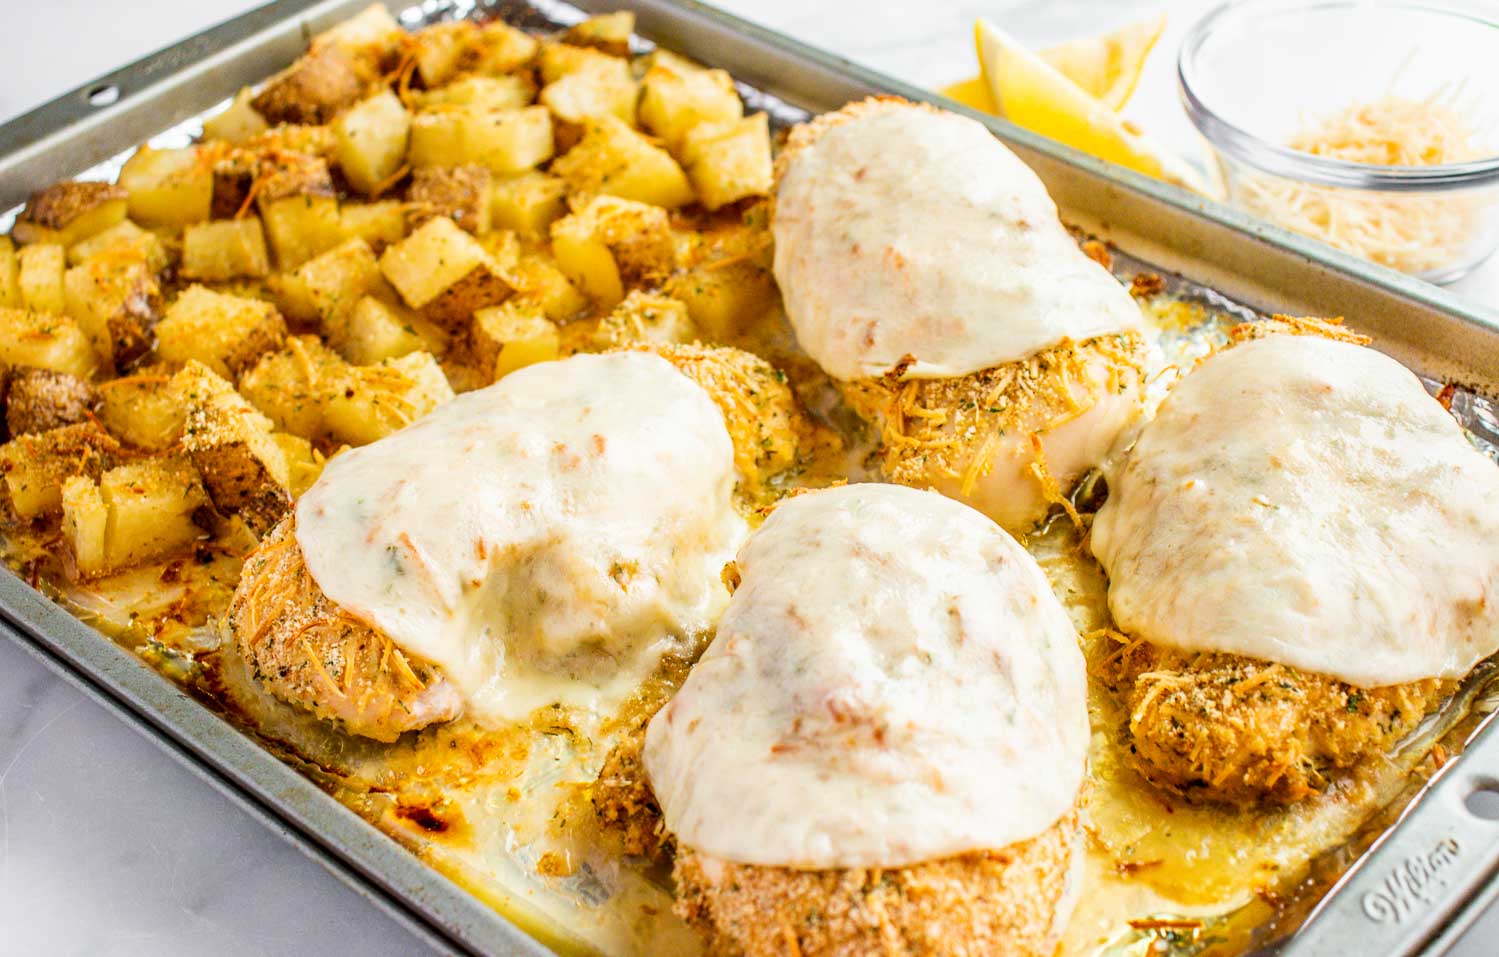 A metal pan with cooked potatoes and 4 chicken breasts with melted cheese on top of it.